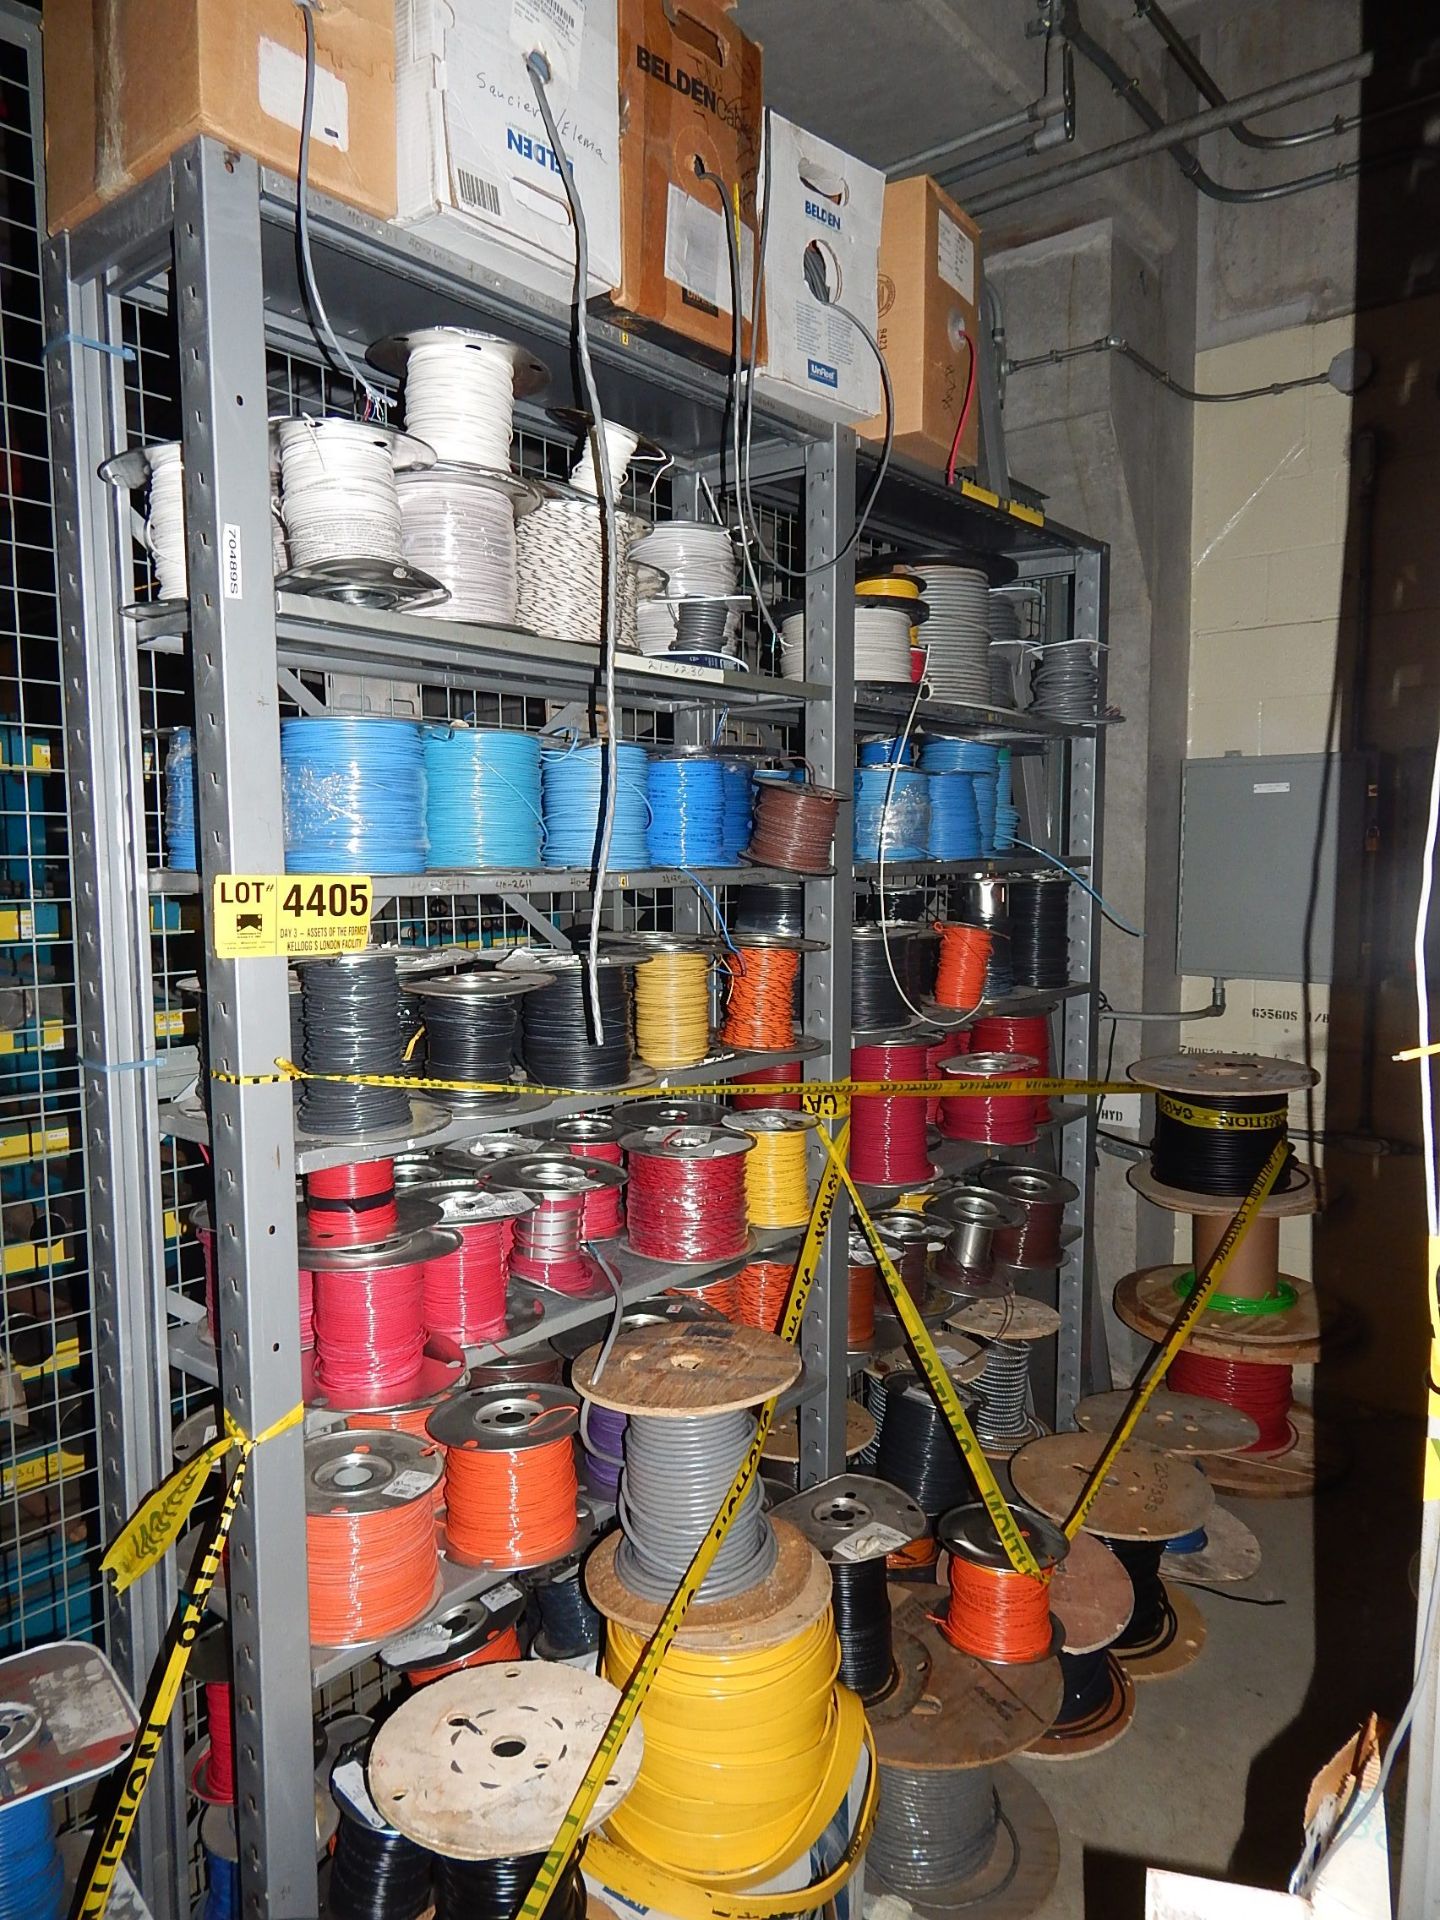 LOT/ SHELF WITH WIRE ROLLS (BUILDING 32, STORES)